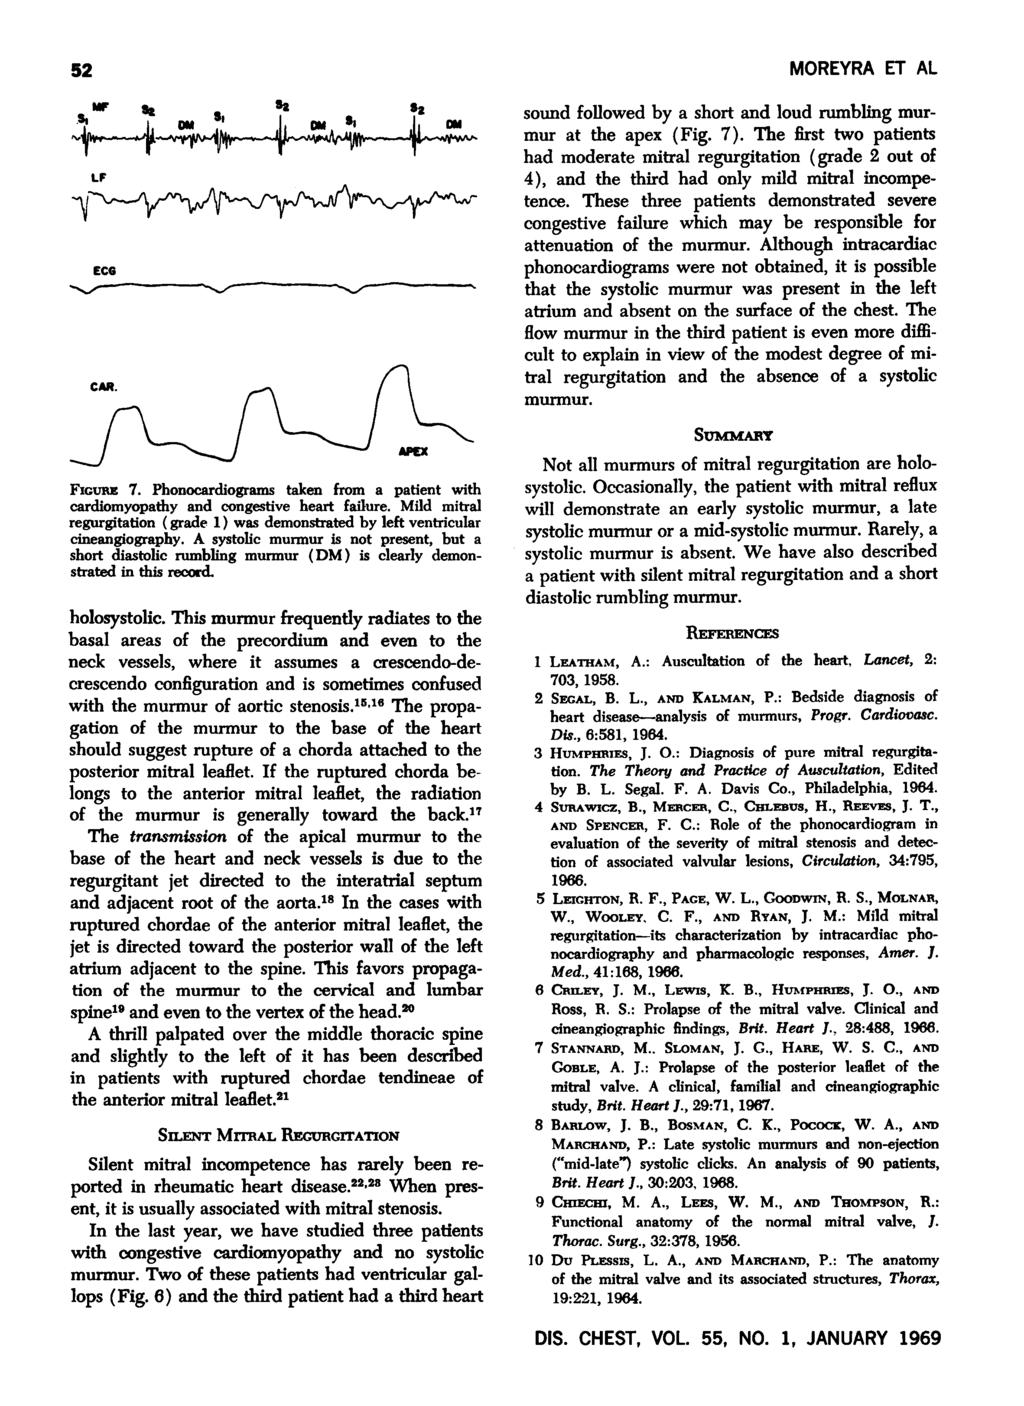 52.. lie ~H,~IV-1I\\o,."'--"'-~~I~.-.JU.-~ LF Eee...------'-""""""-------'-/""""-----... FIGURE 7. Phonocardiograms taken from a patient with cardiomyopathy and congestive heart failure.